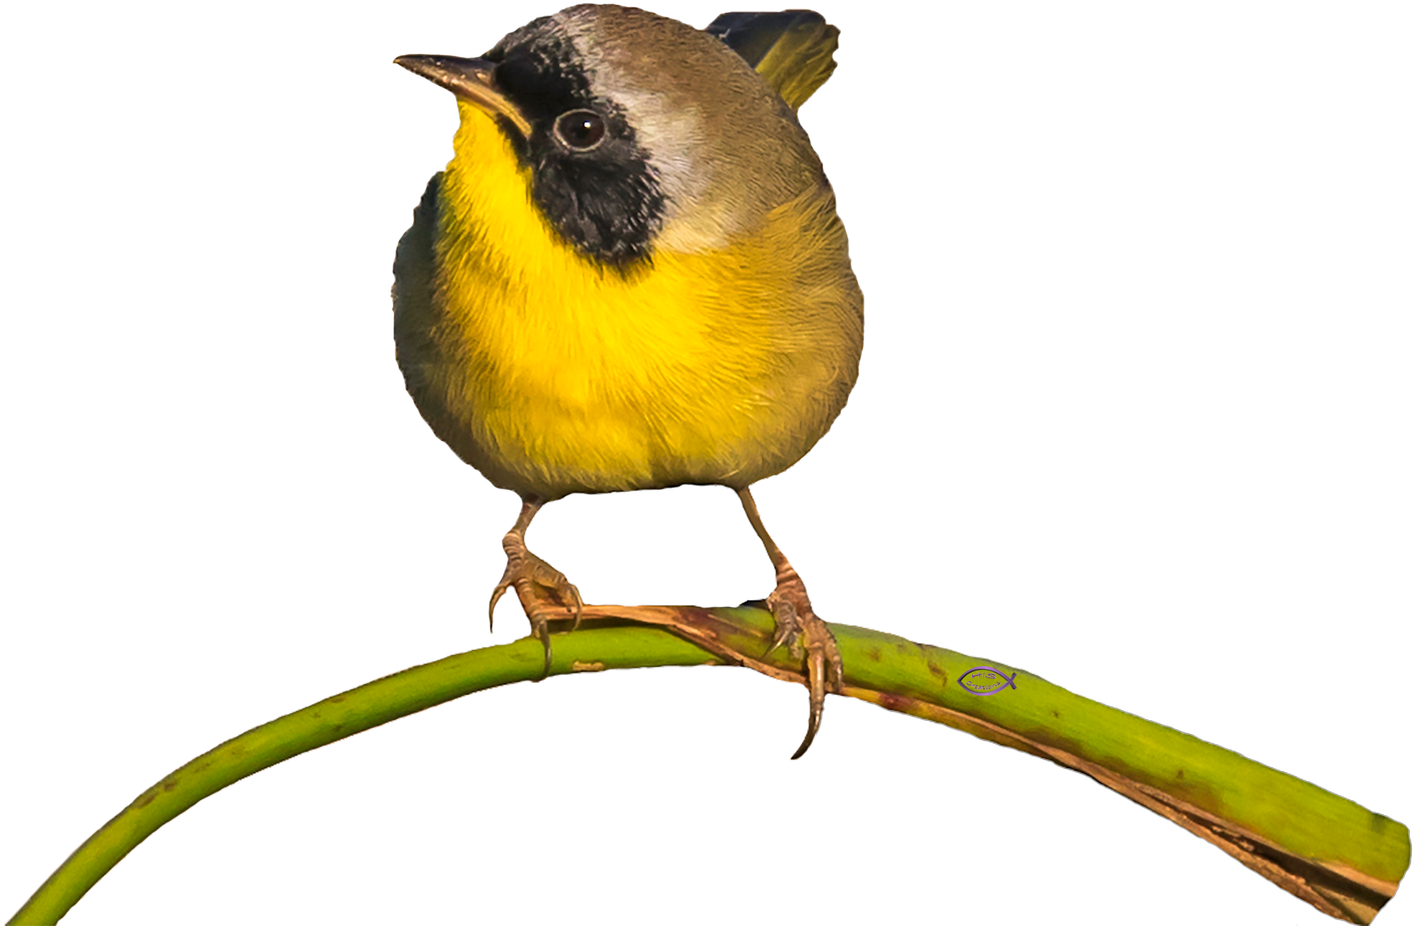 Common Yellowthroat Warbler - New World Warblers (1600x1311)